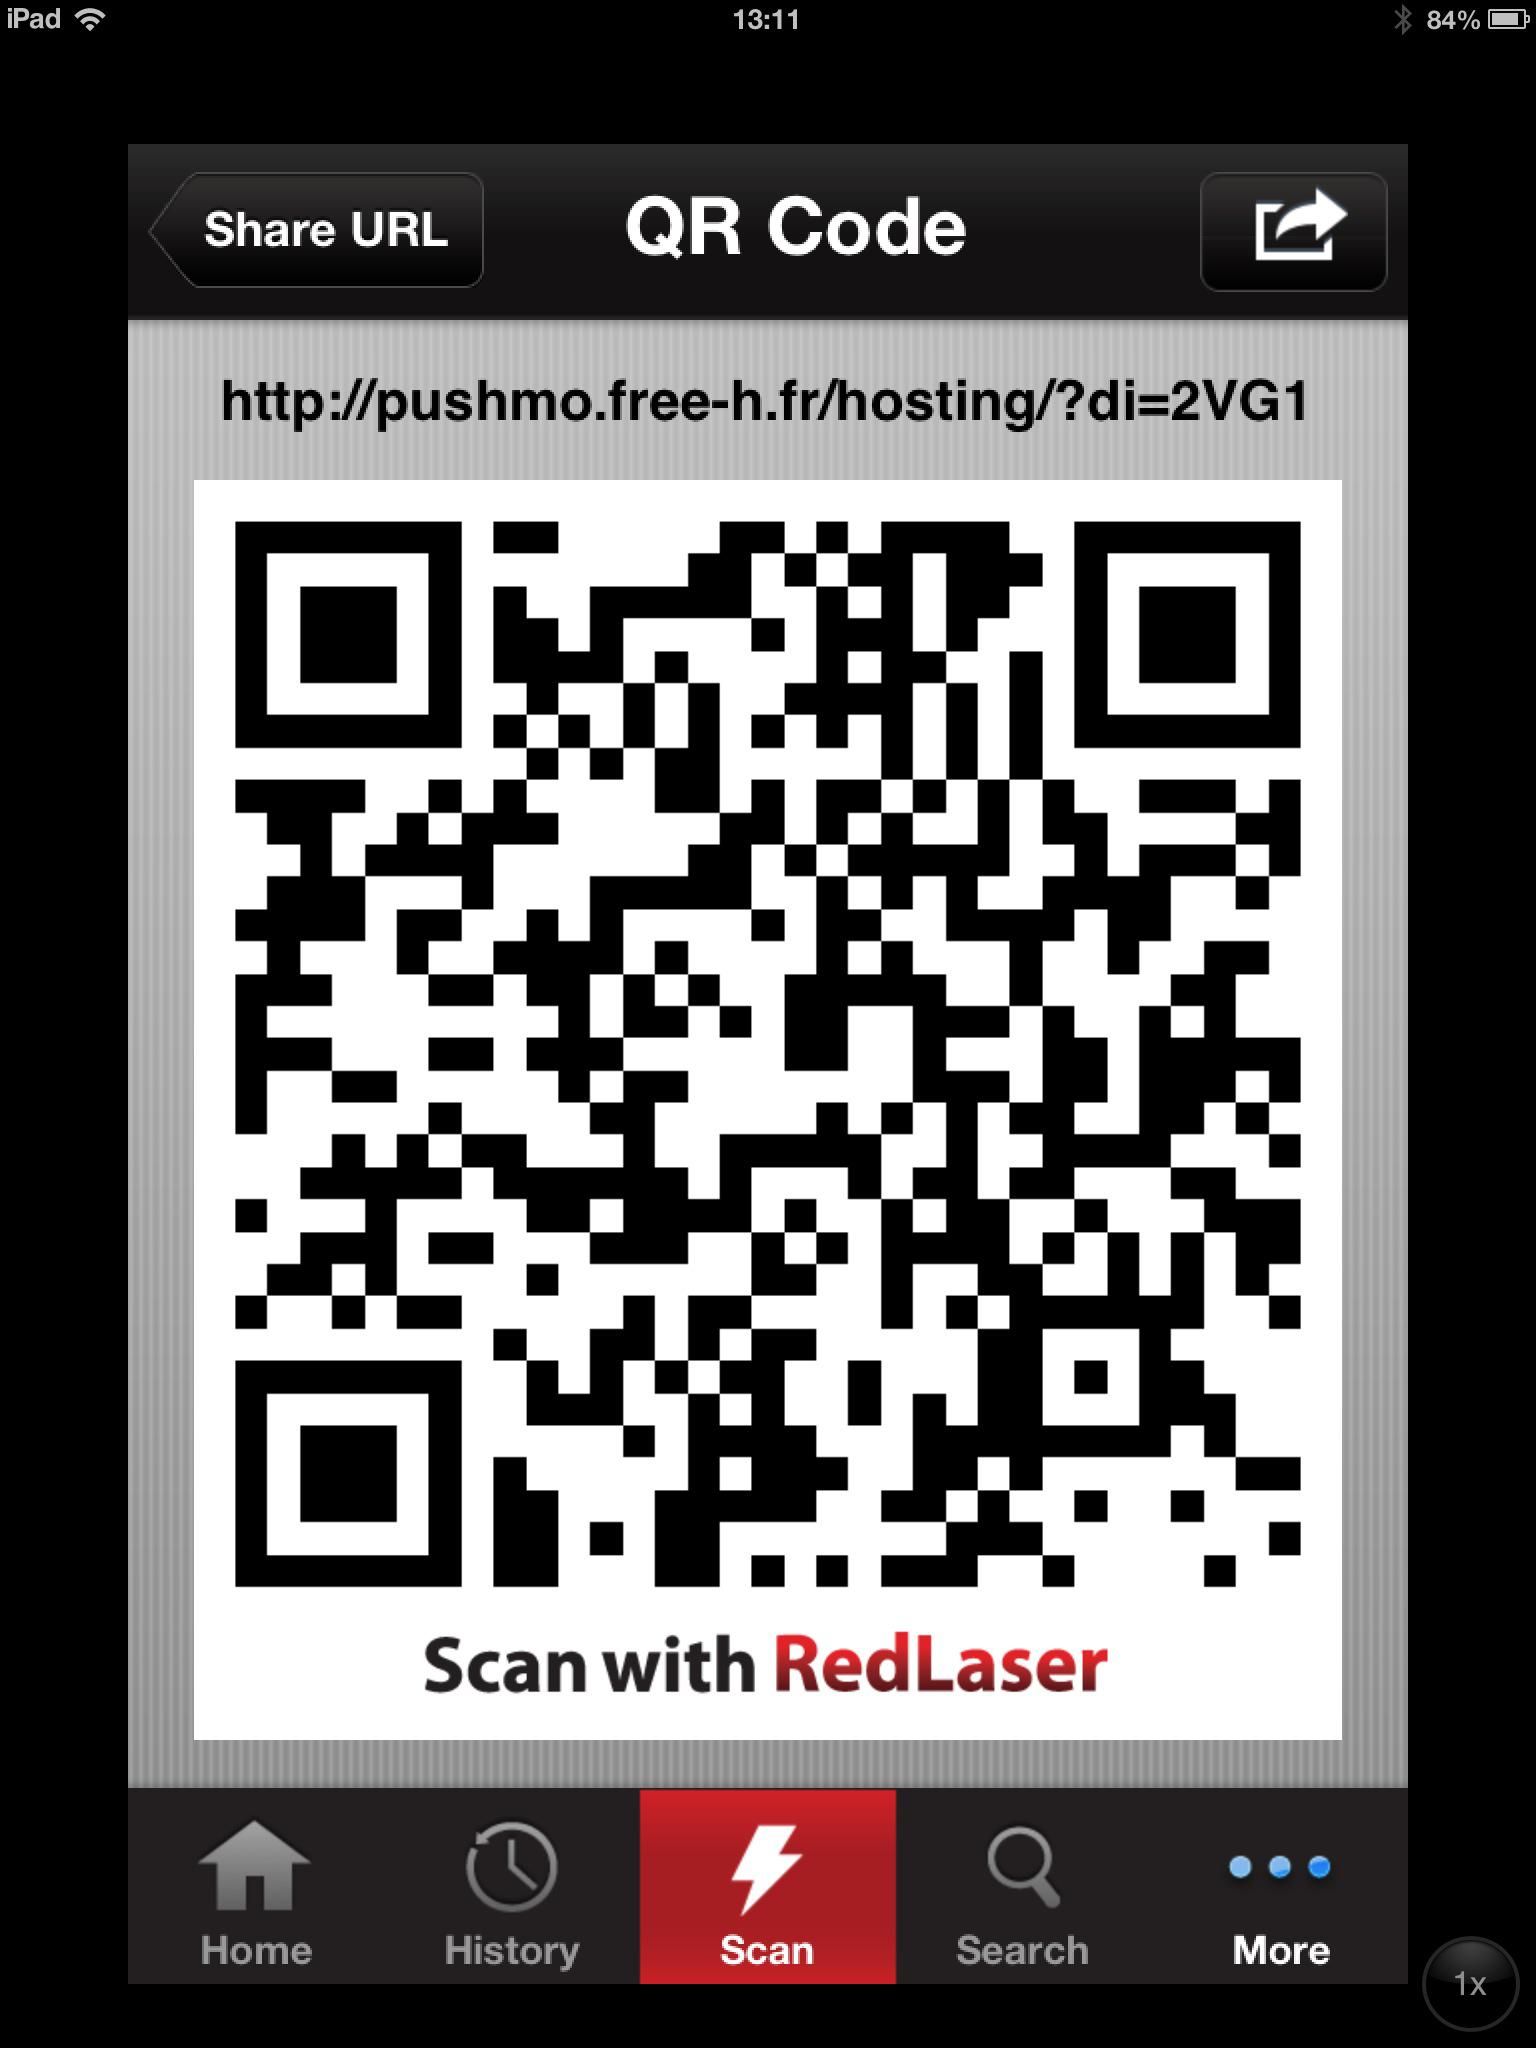 qr code for link to windows